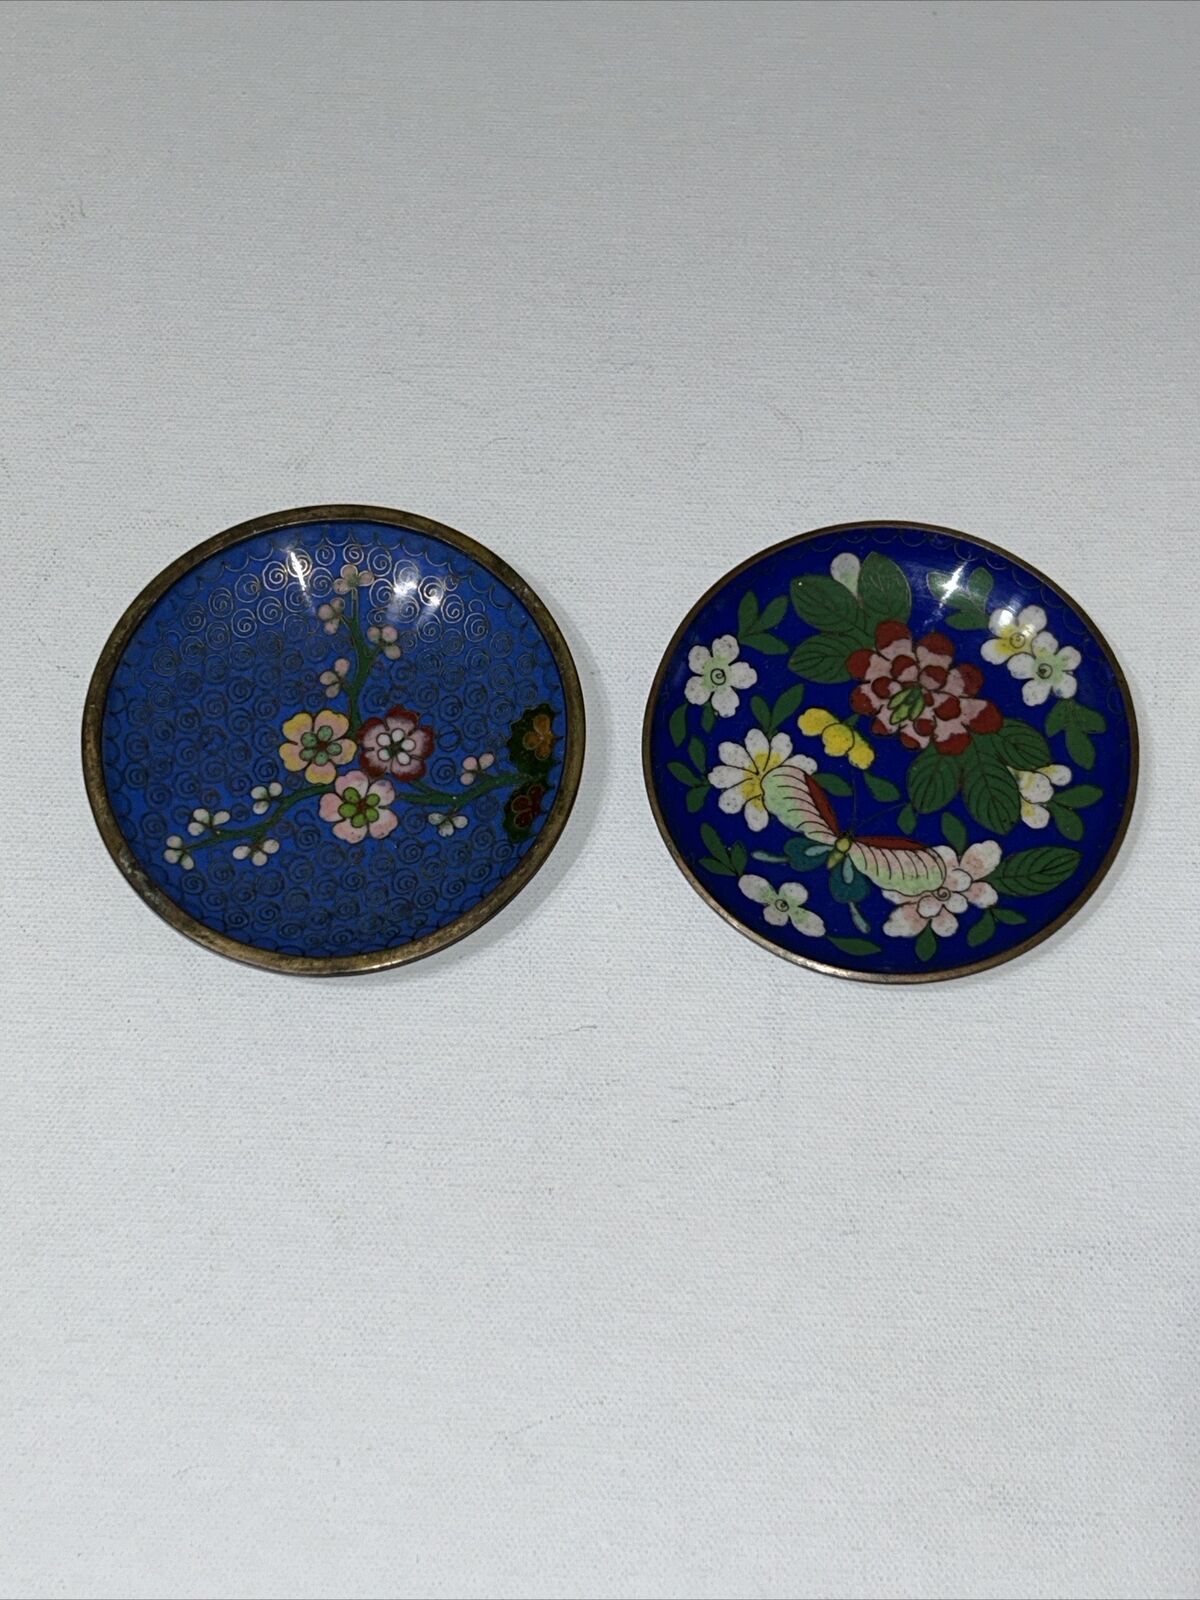 antique enameled cloisonné coasters dishes marked China